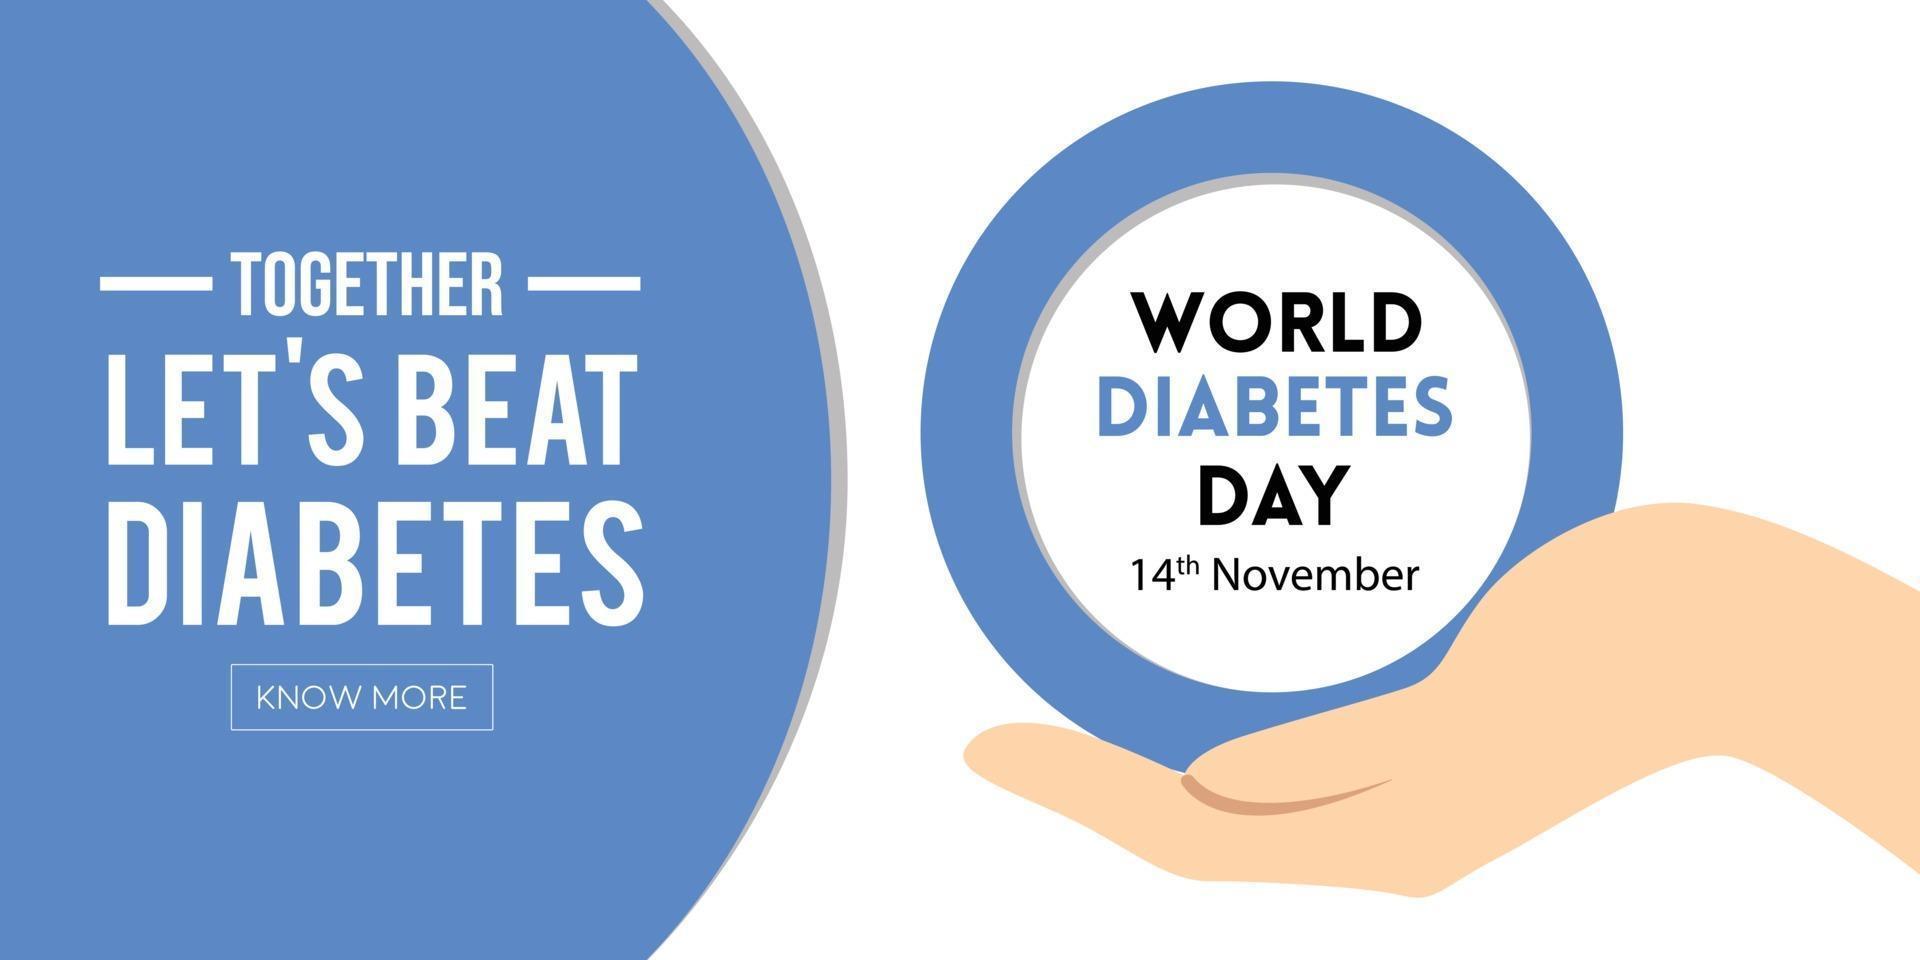 World diabetes day awareness concept banner design for free download vector